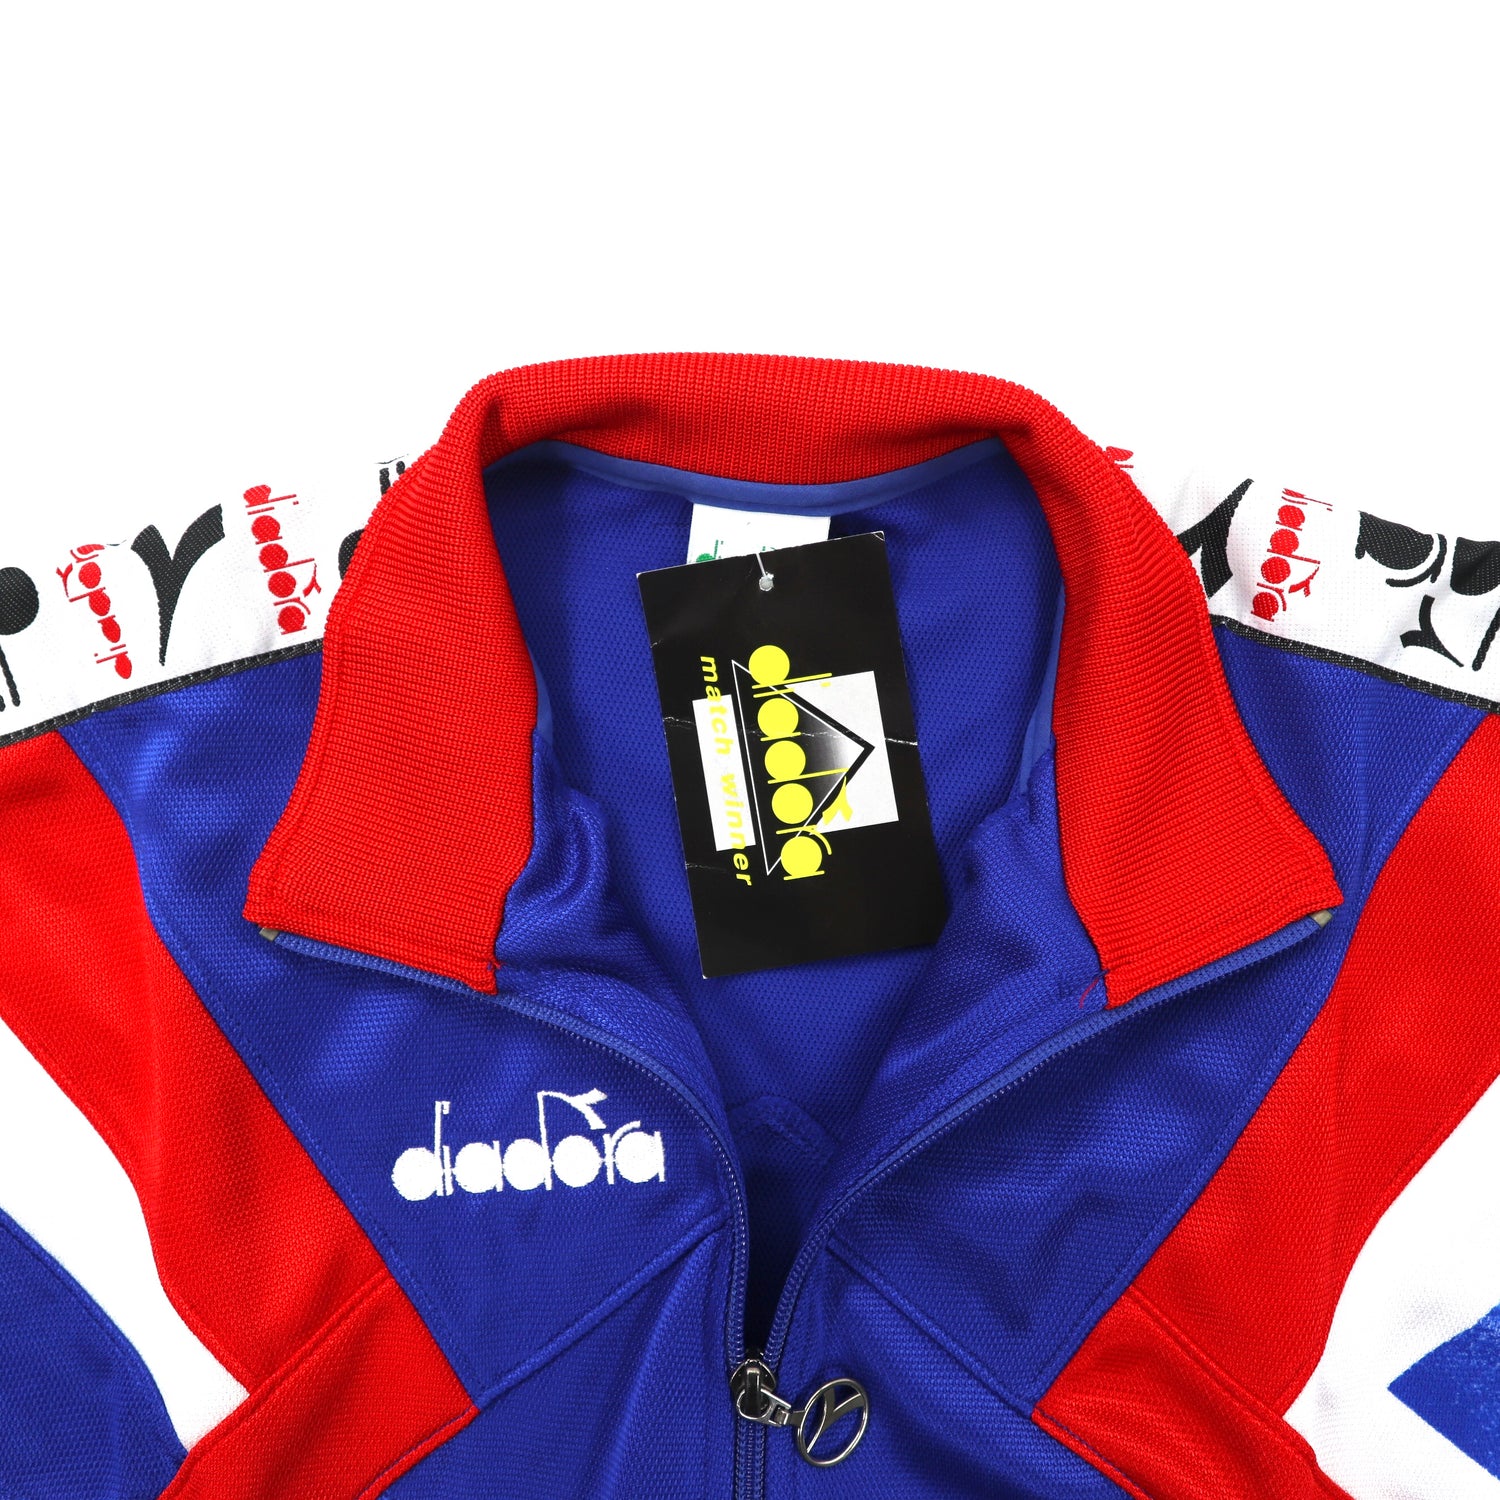 DIADORA TRACK JACKET S Blue Polyester side line logo embroidery 90s Unused